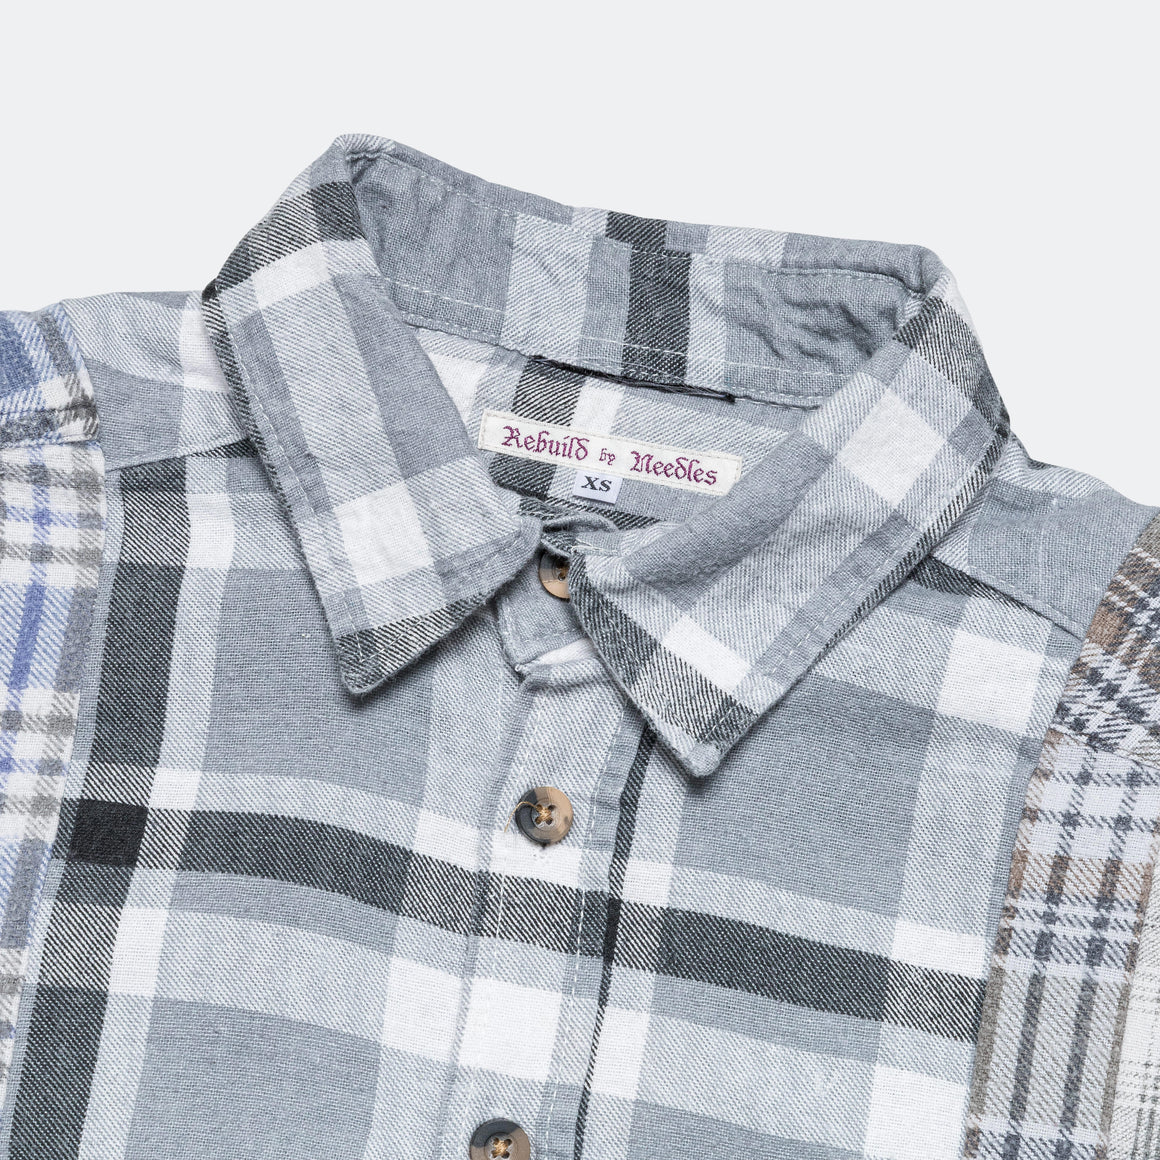 Needles - Rebuild Flannel 7 Cuts Shirt - X-Small #1 - UP THERE